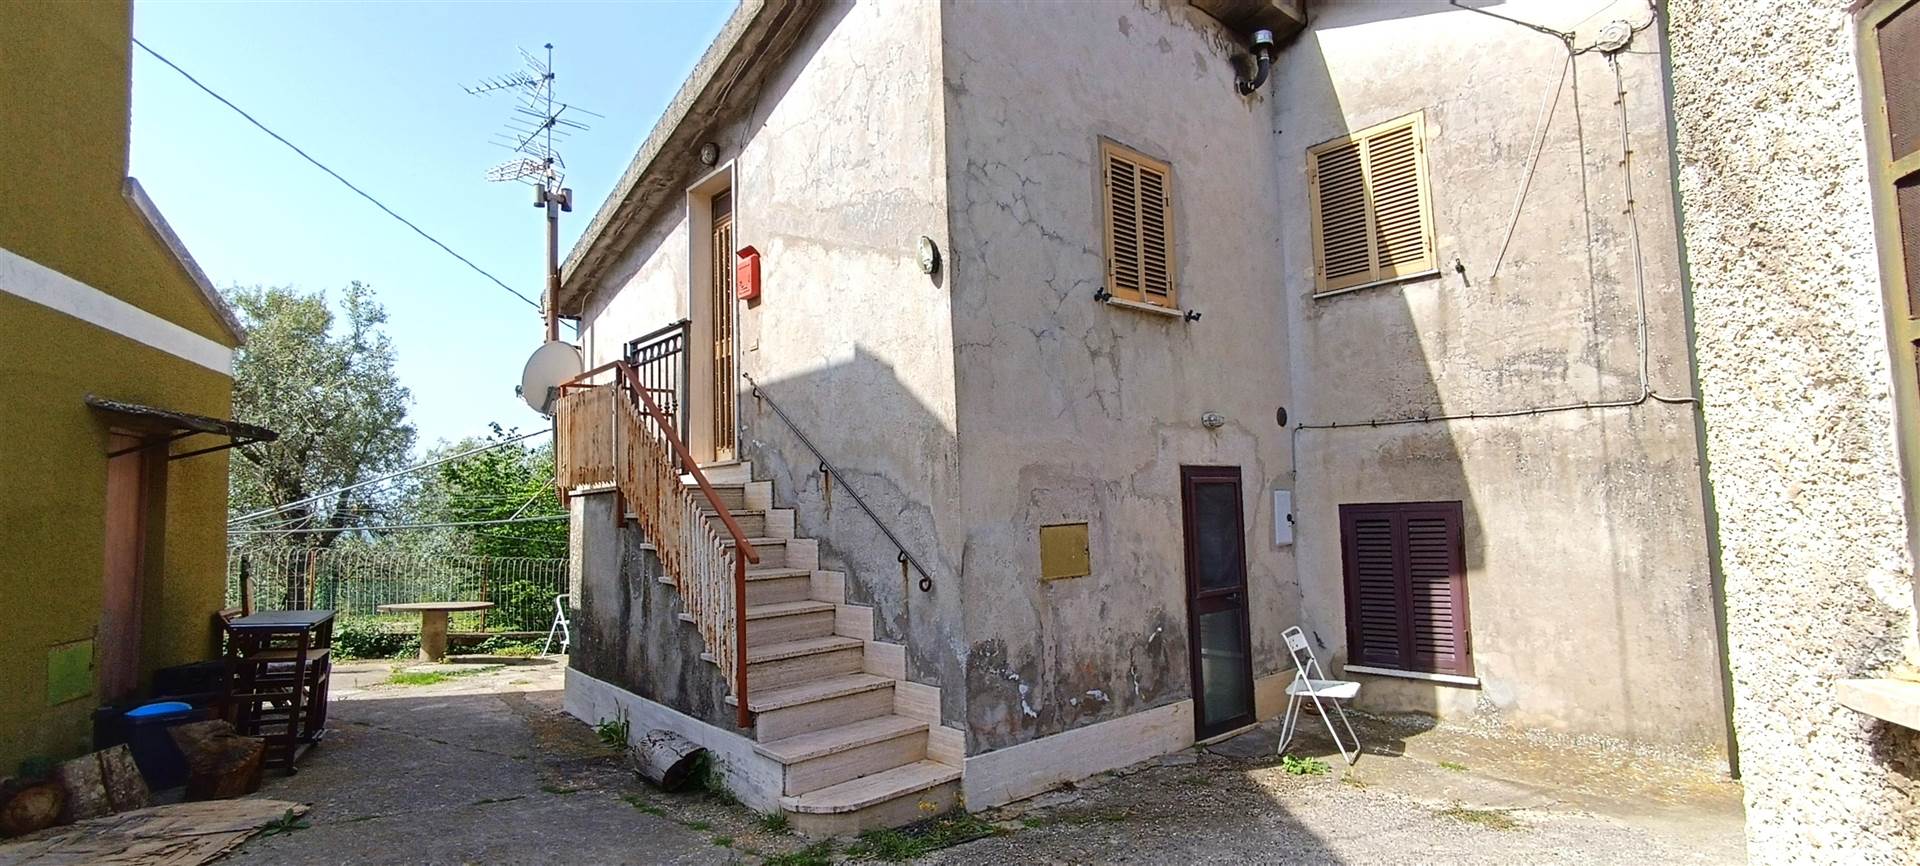 COLLE BERARDO, MONTEBUONO, Apartment for sale of 45 Sq. mt., Good condition, Heating Individual heating system, Energetic class: G, placed at Ground, 